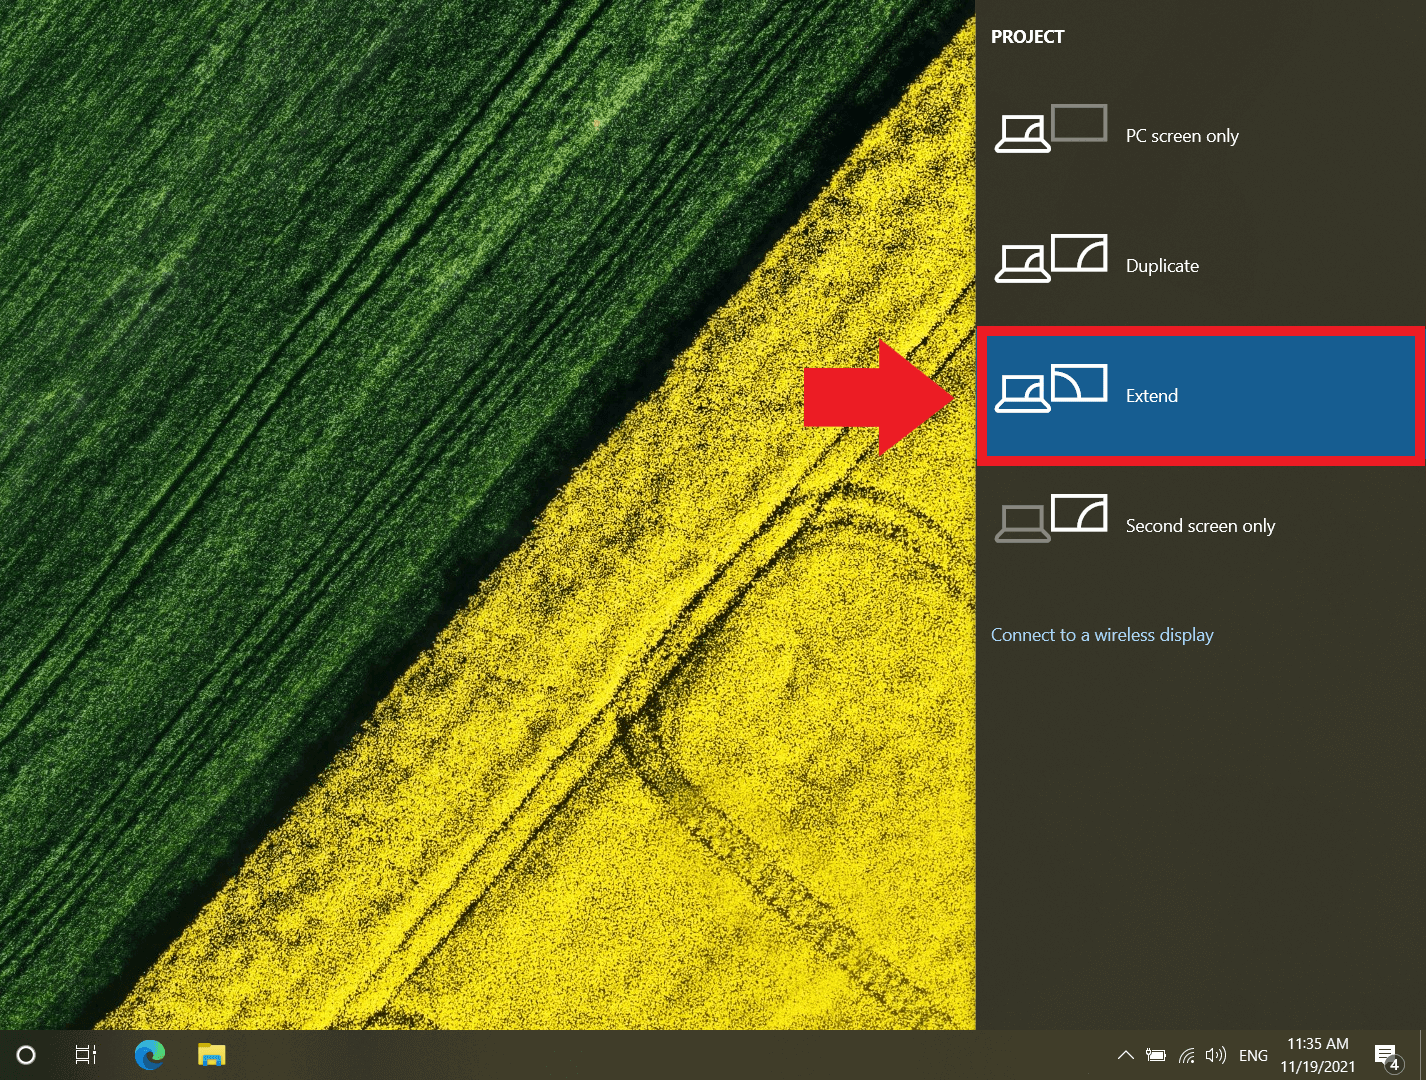 Windows display option “Extend” for an additional screen